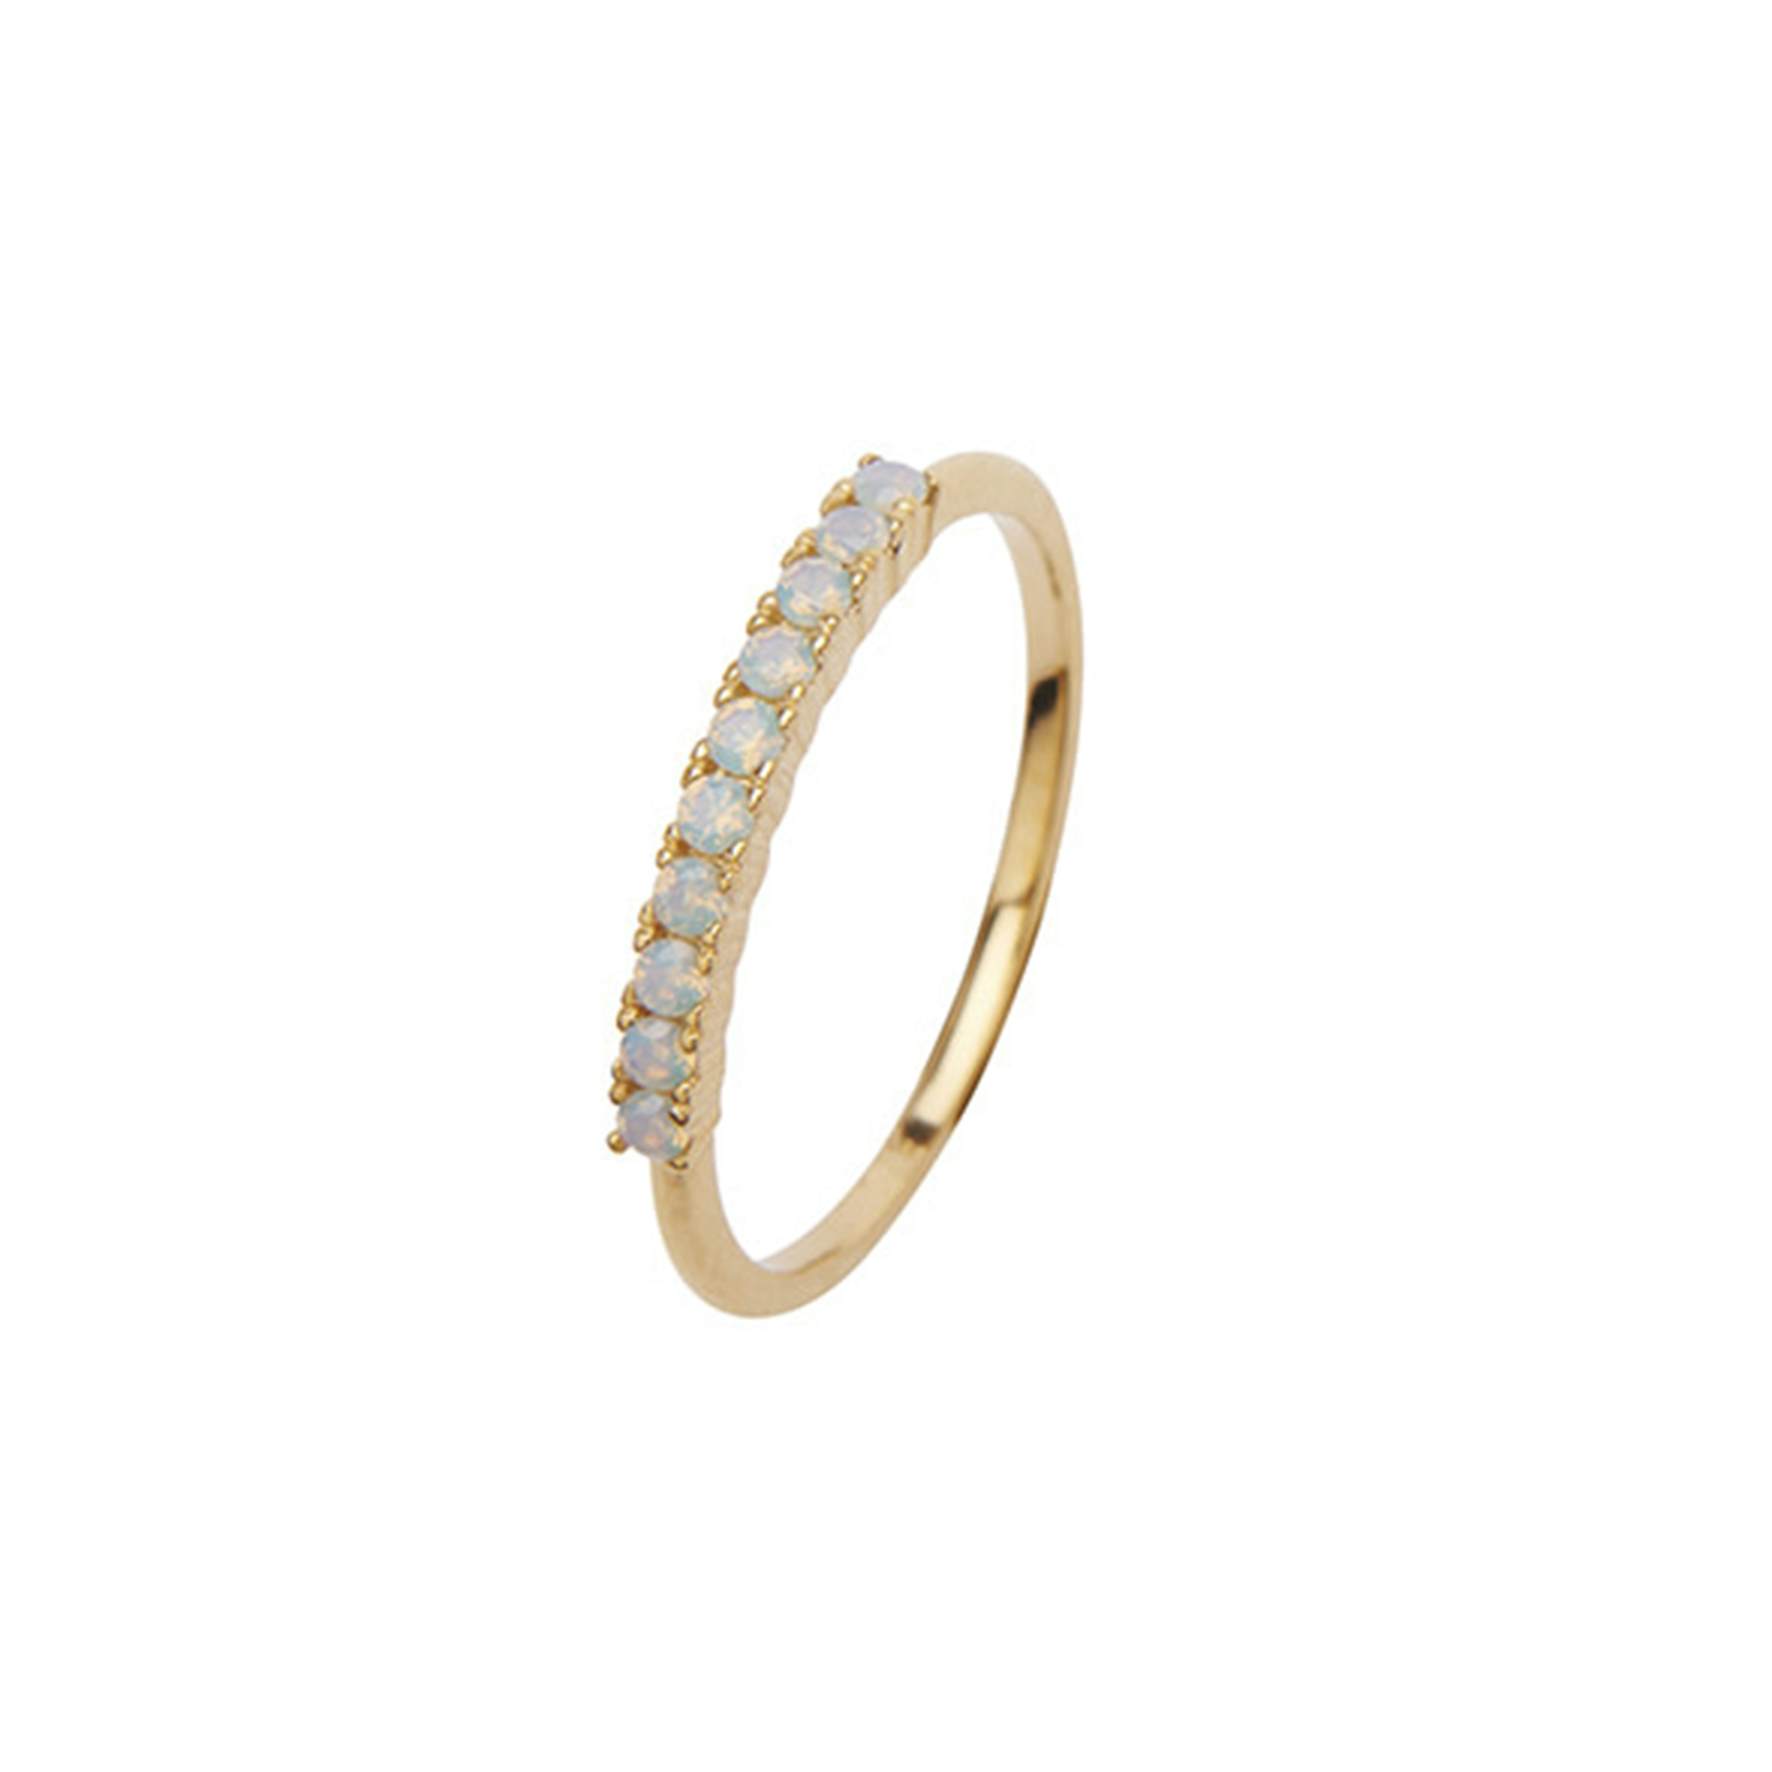 Fineley Crystal Ring from Pico in Goldplated-Silver Sterling 925|Mint